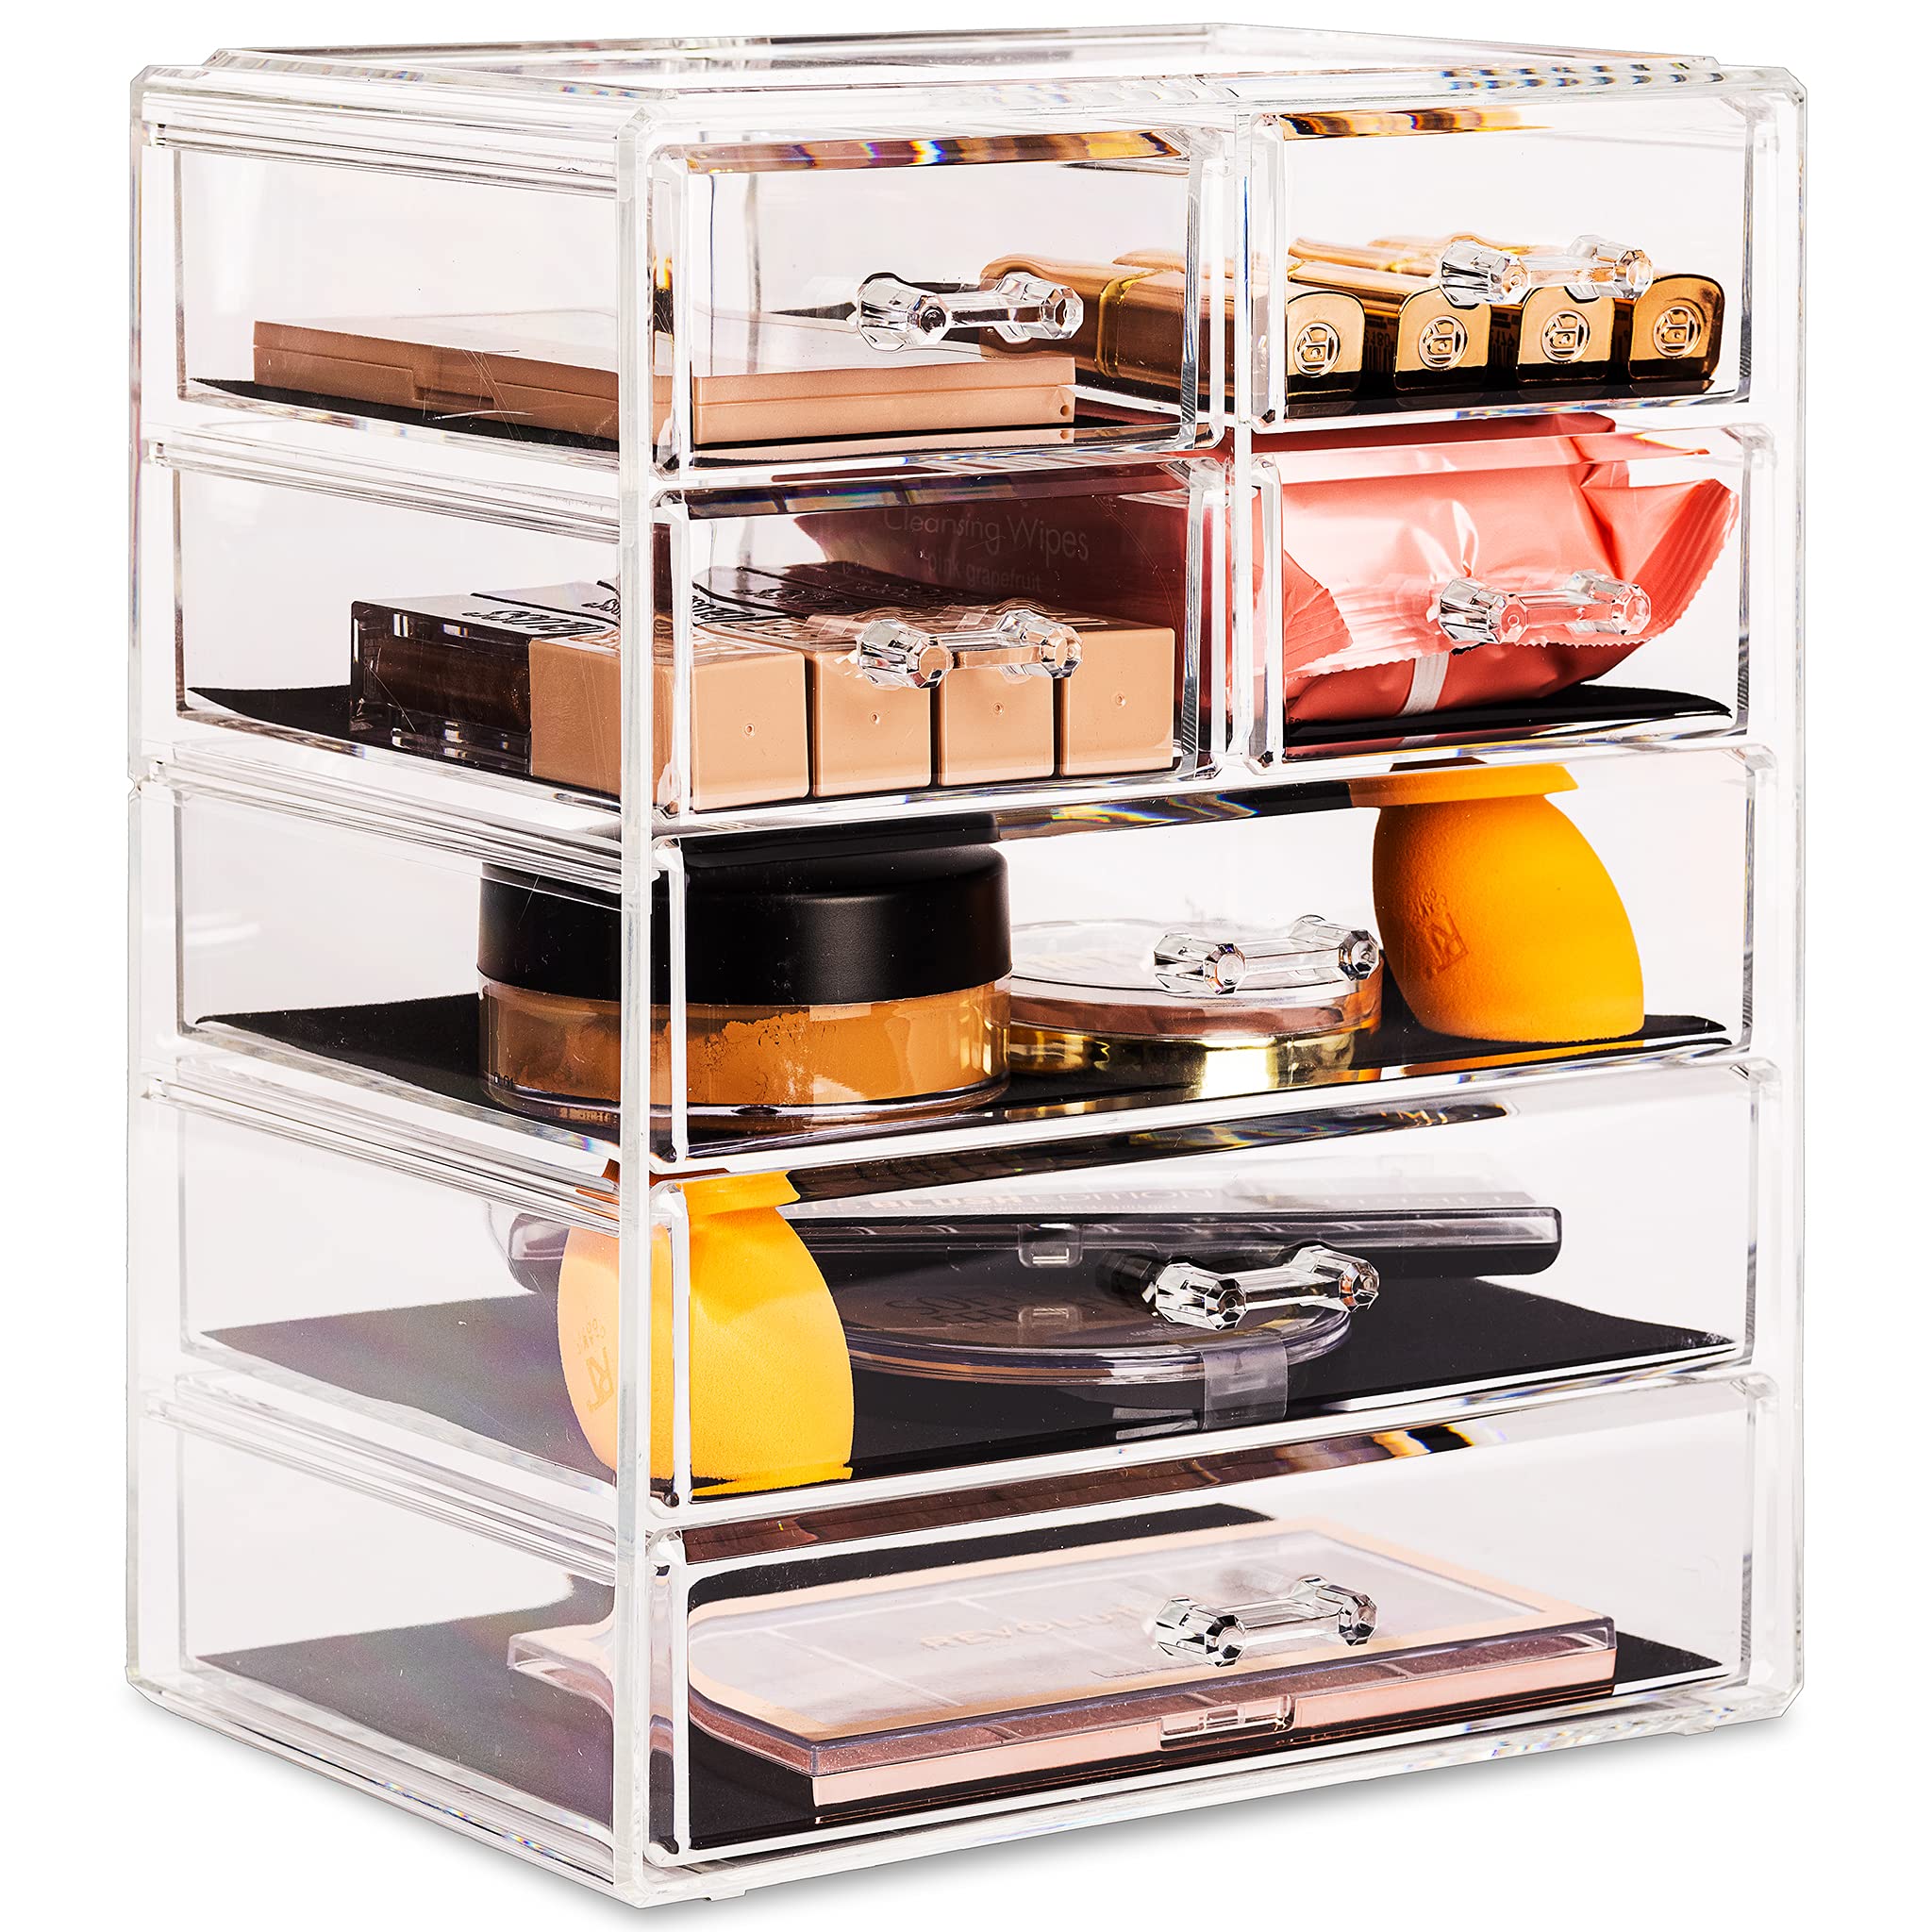 Sorbus Acrylic Clear Makeup Organizer - Big & Spacious Cosmetic Display Case - Stylish Designed Jewelry & Make Up Organizers and Storage for Vanity, Bathroom (3 Large, 4 Small Drawers)